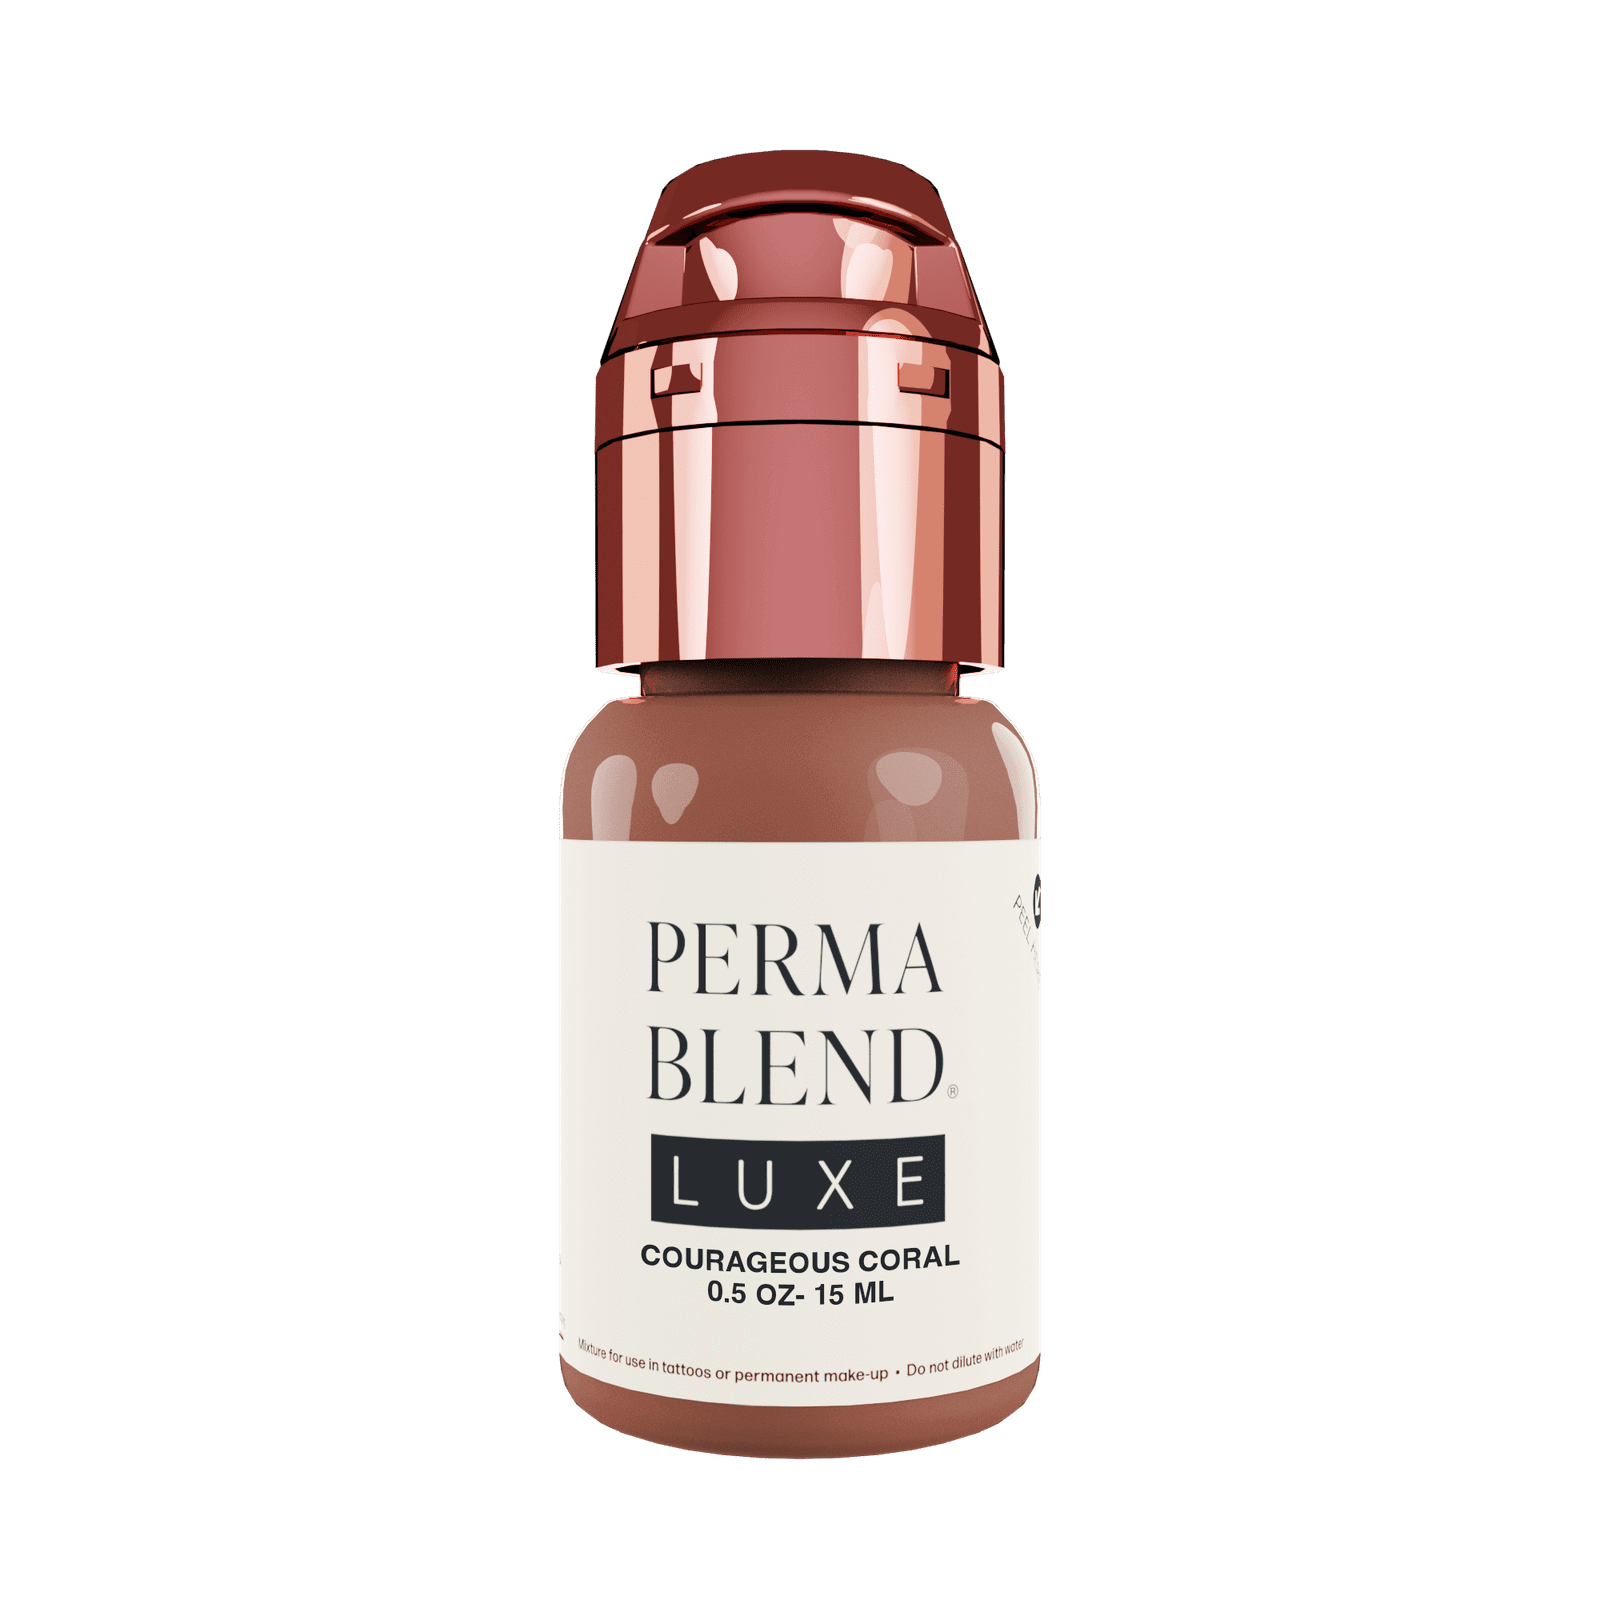 Perma Blend Luxe Courageous Coral